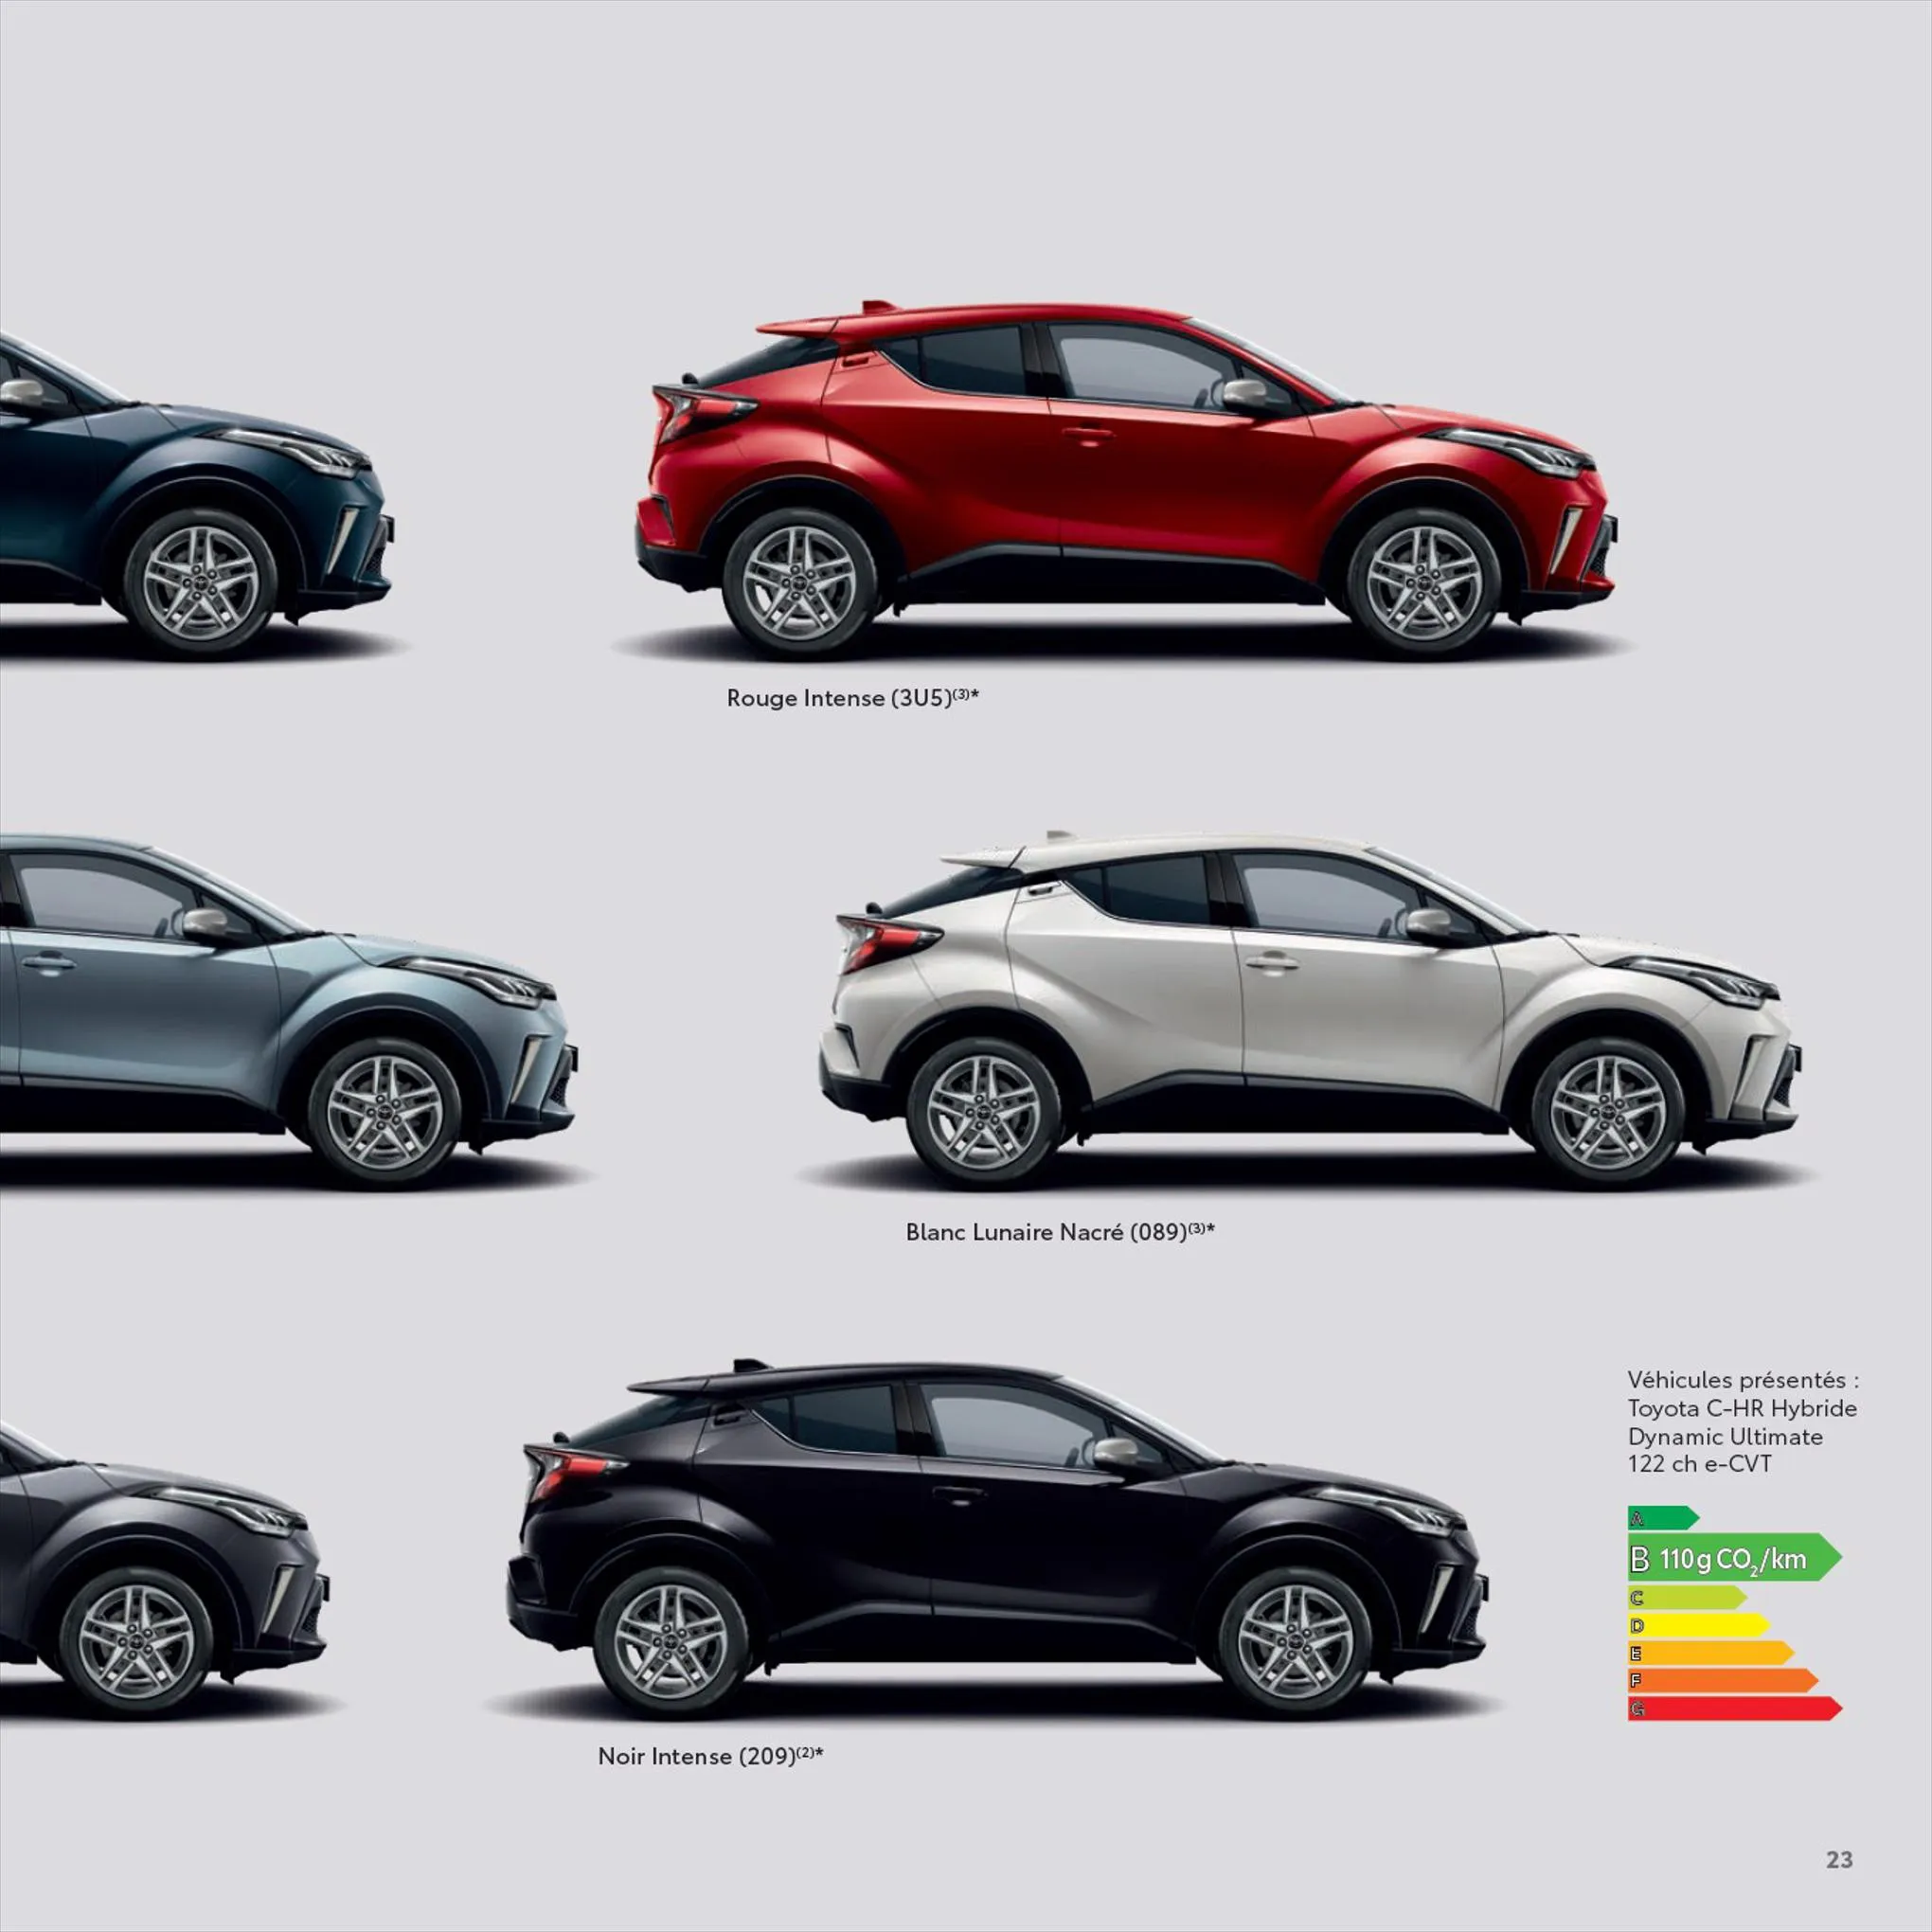 Catalogue Toyota C-HR
 , page 00023